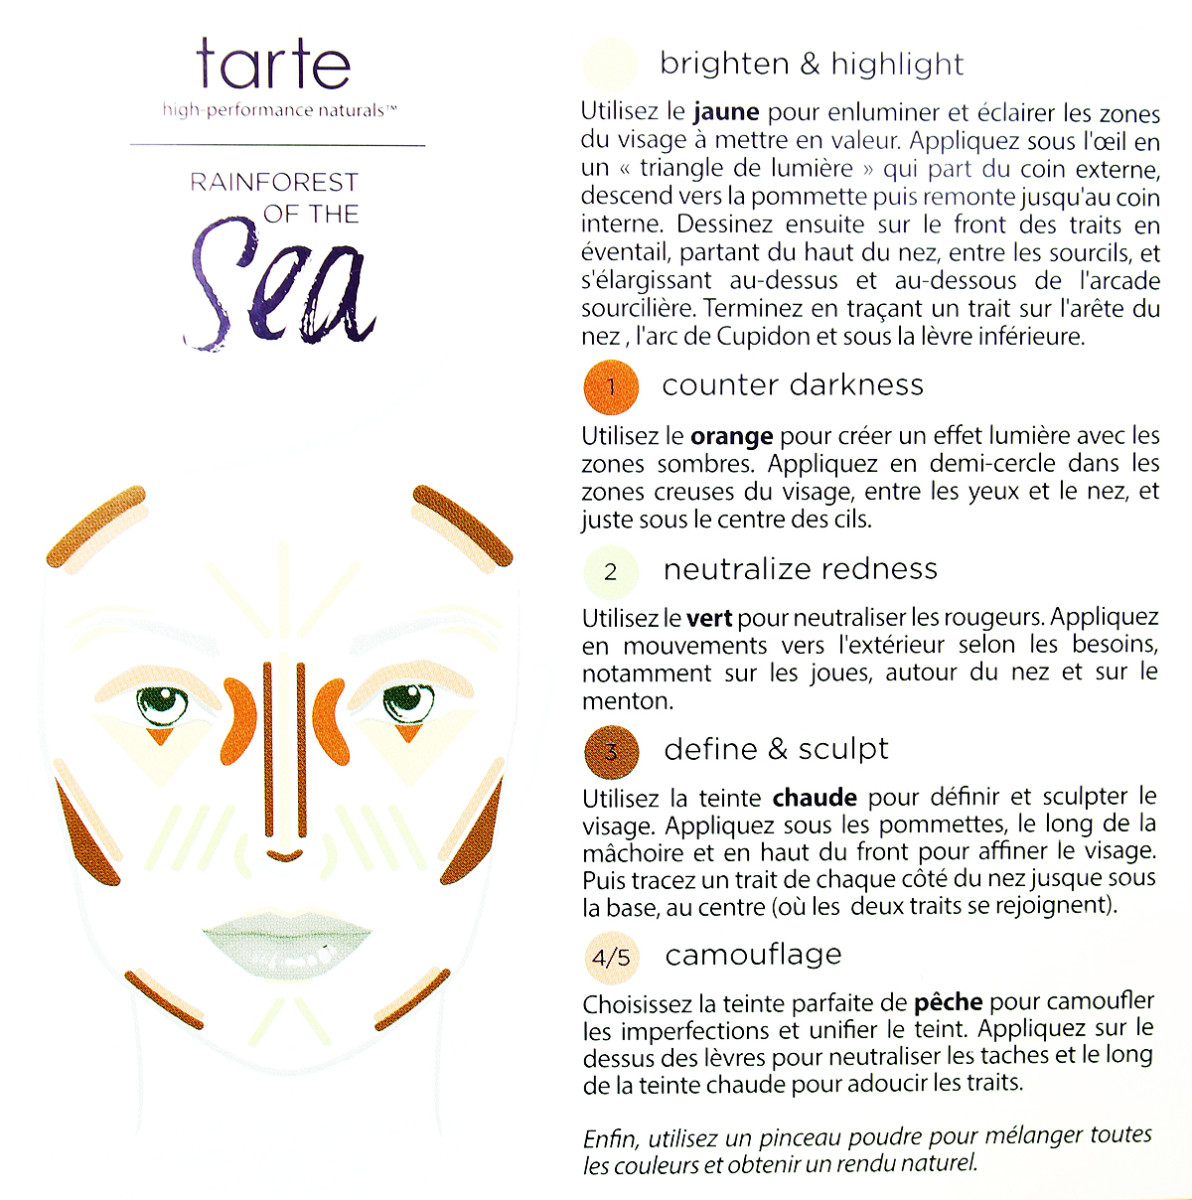 Tarte Rainforest of the Sea Wipeout Color-Correcting Palette guide (sephora.ca) www.imabeautygeek.com